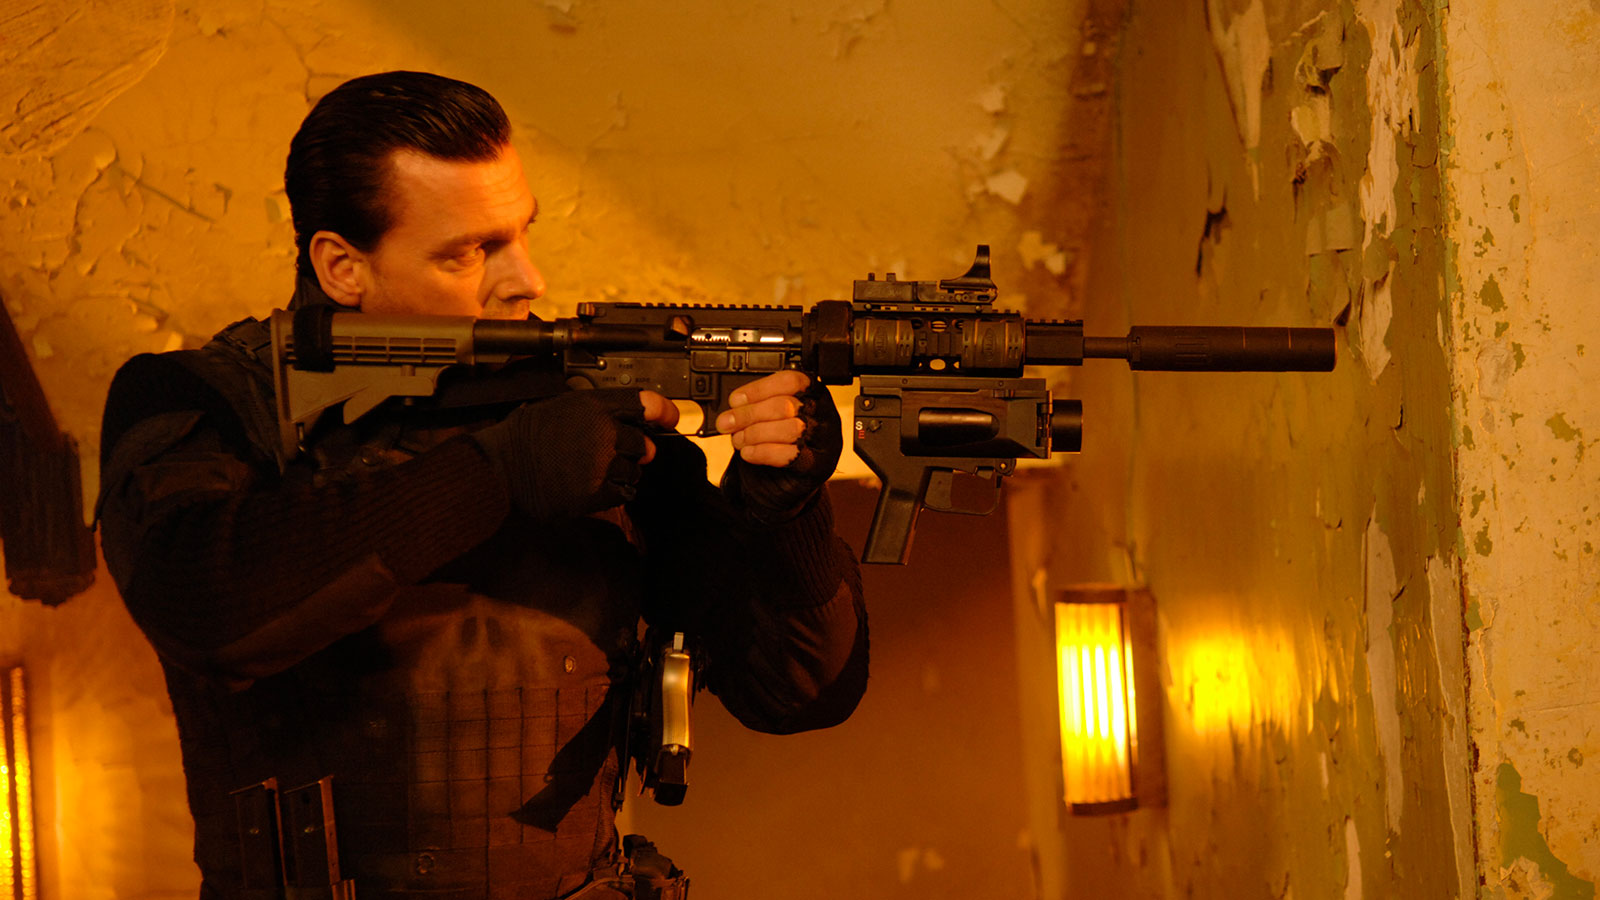 The Punisher: War Zone - Great! Network